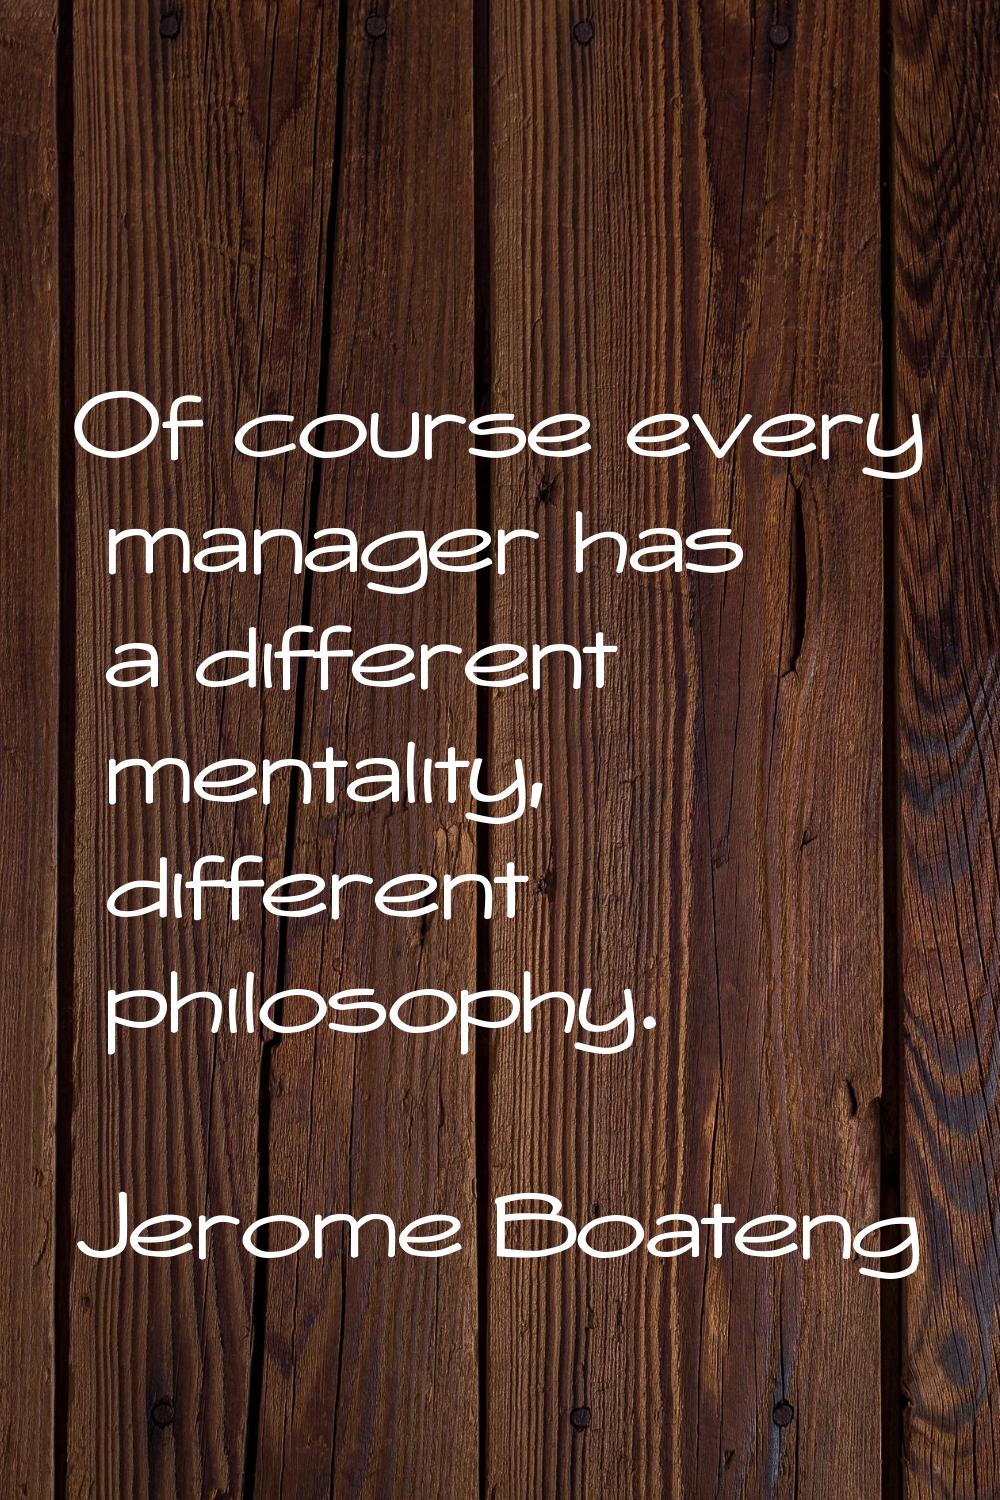 Of course every manager has a different mentality, different philosophy.